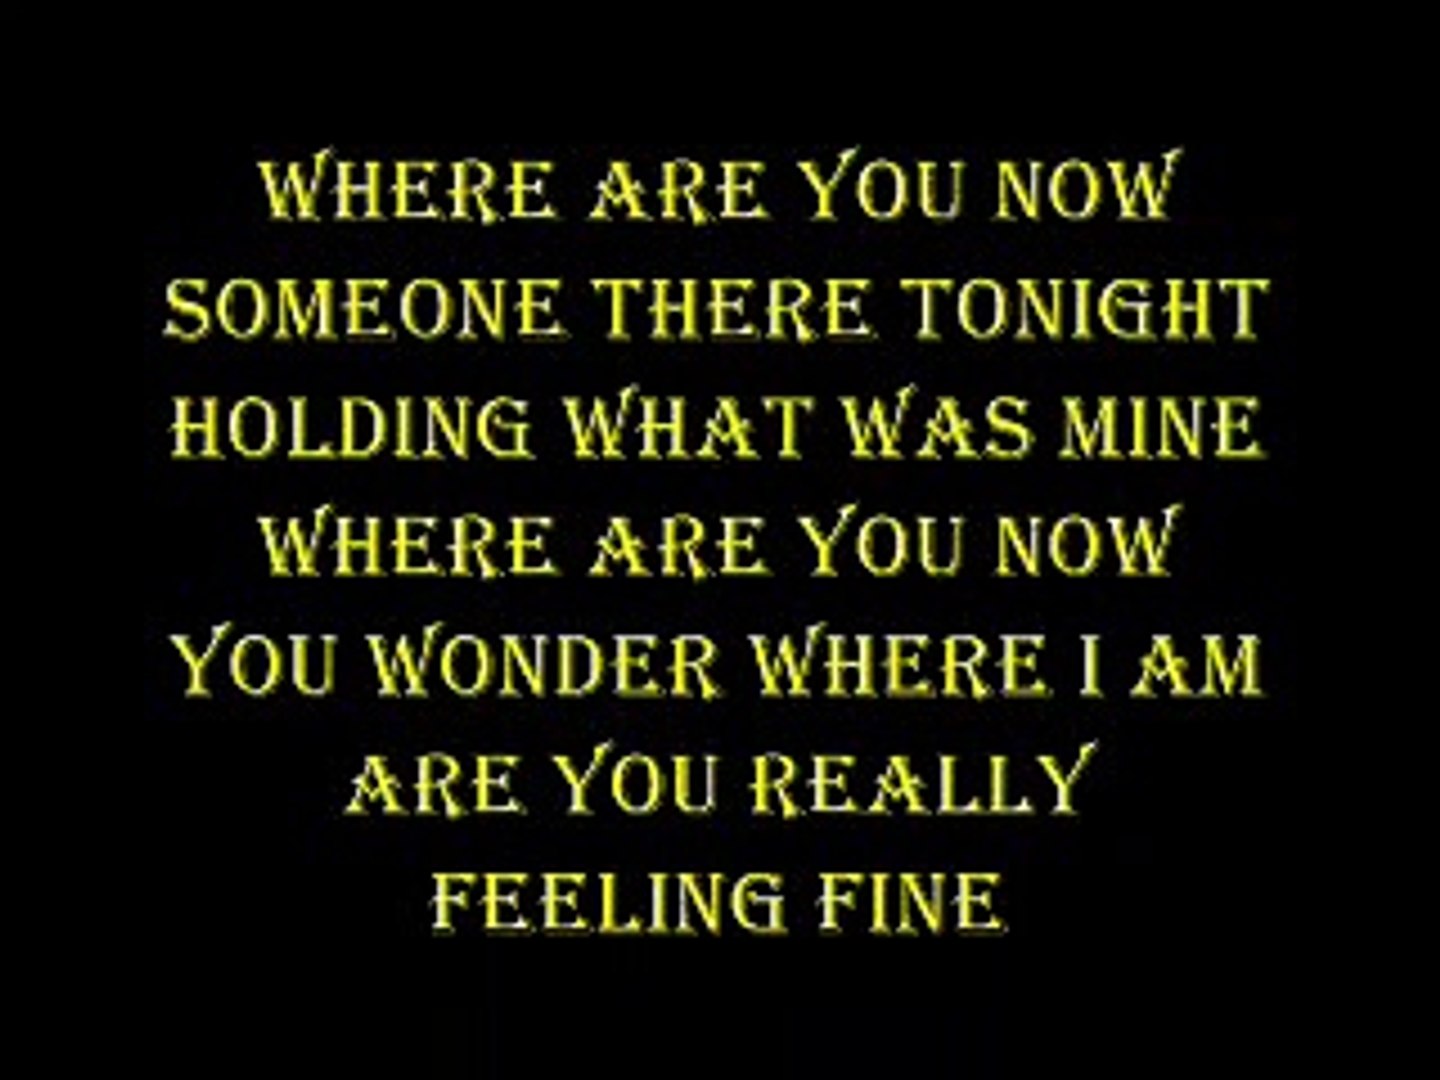 Justin Bieber - Where Are You Now Original with Lyrics - video Dailymotion